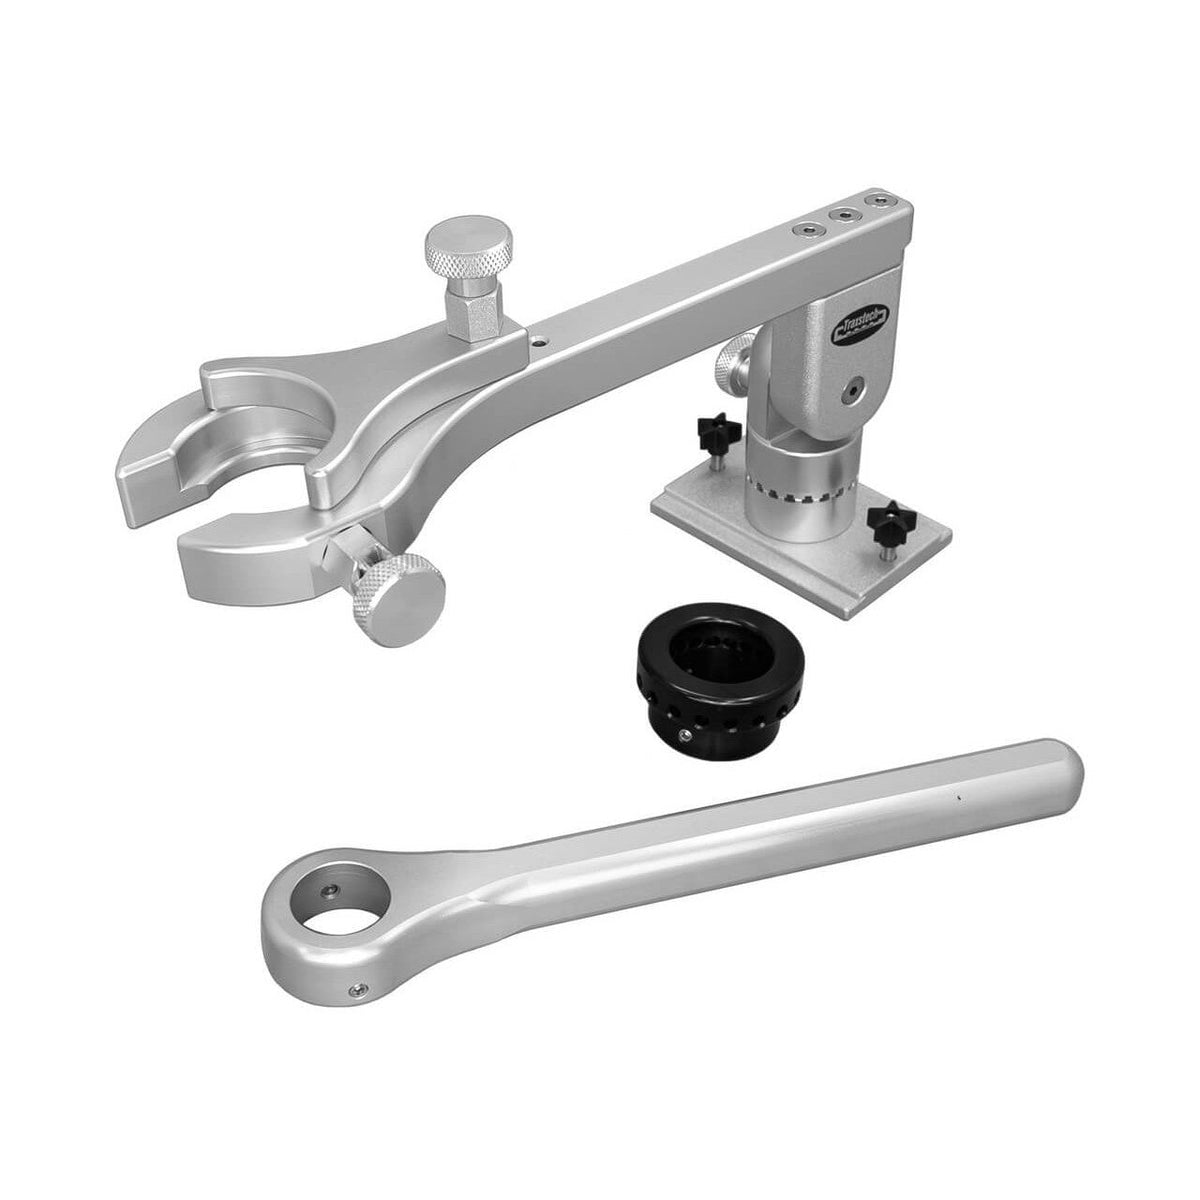 View of boating_accessories Traxstech Aluminum Transducer Mount portable with 5' pole and track mount Silver available at EZOKO Pike and Musky Shop